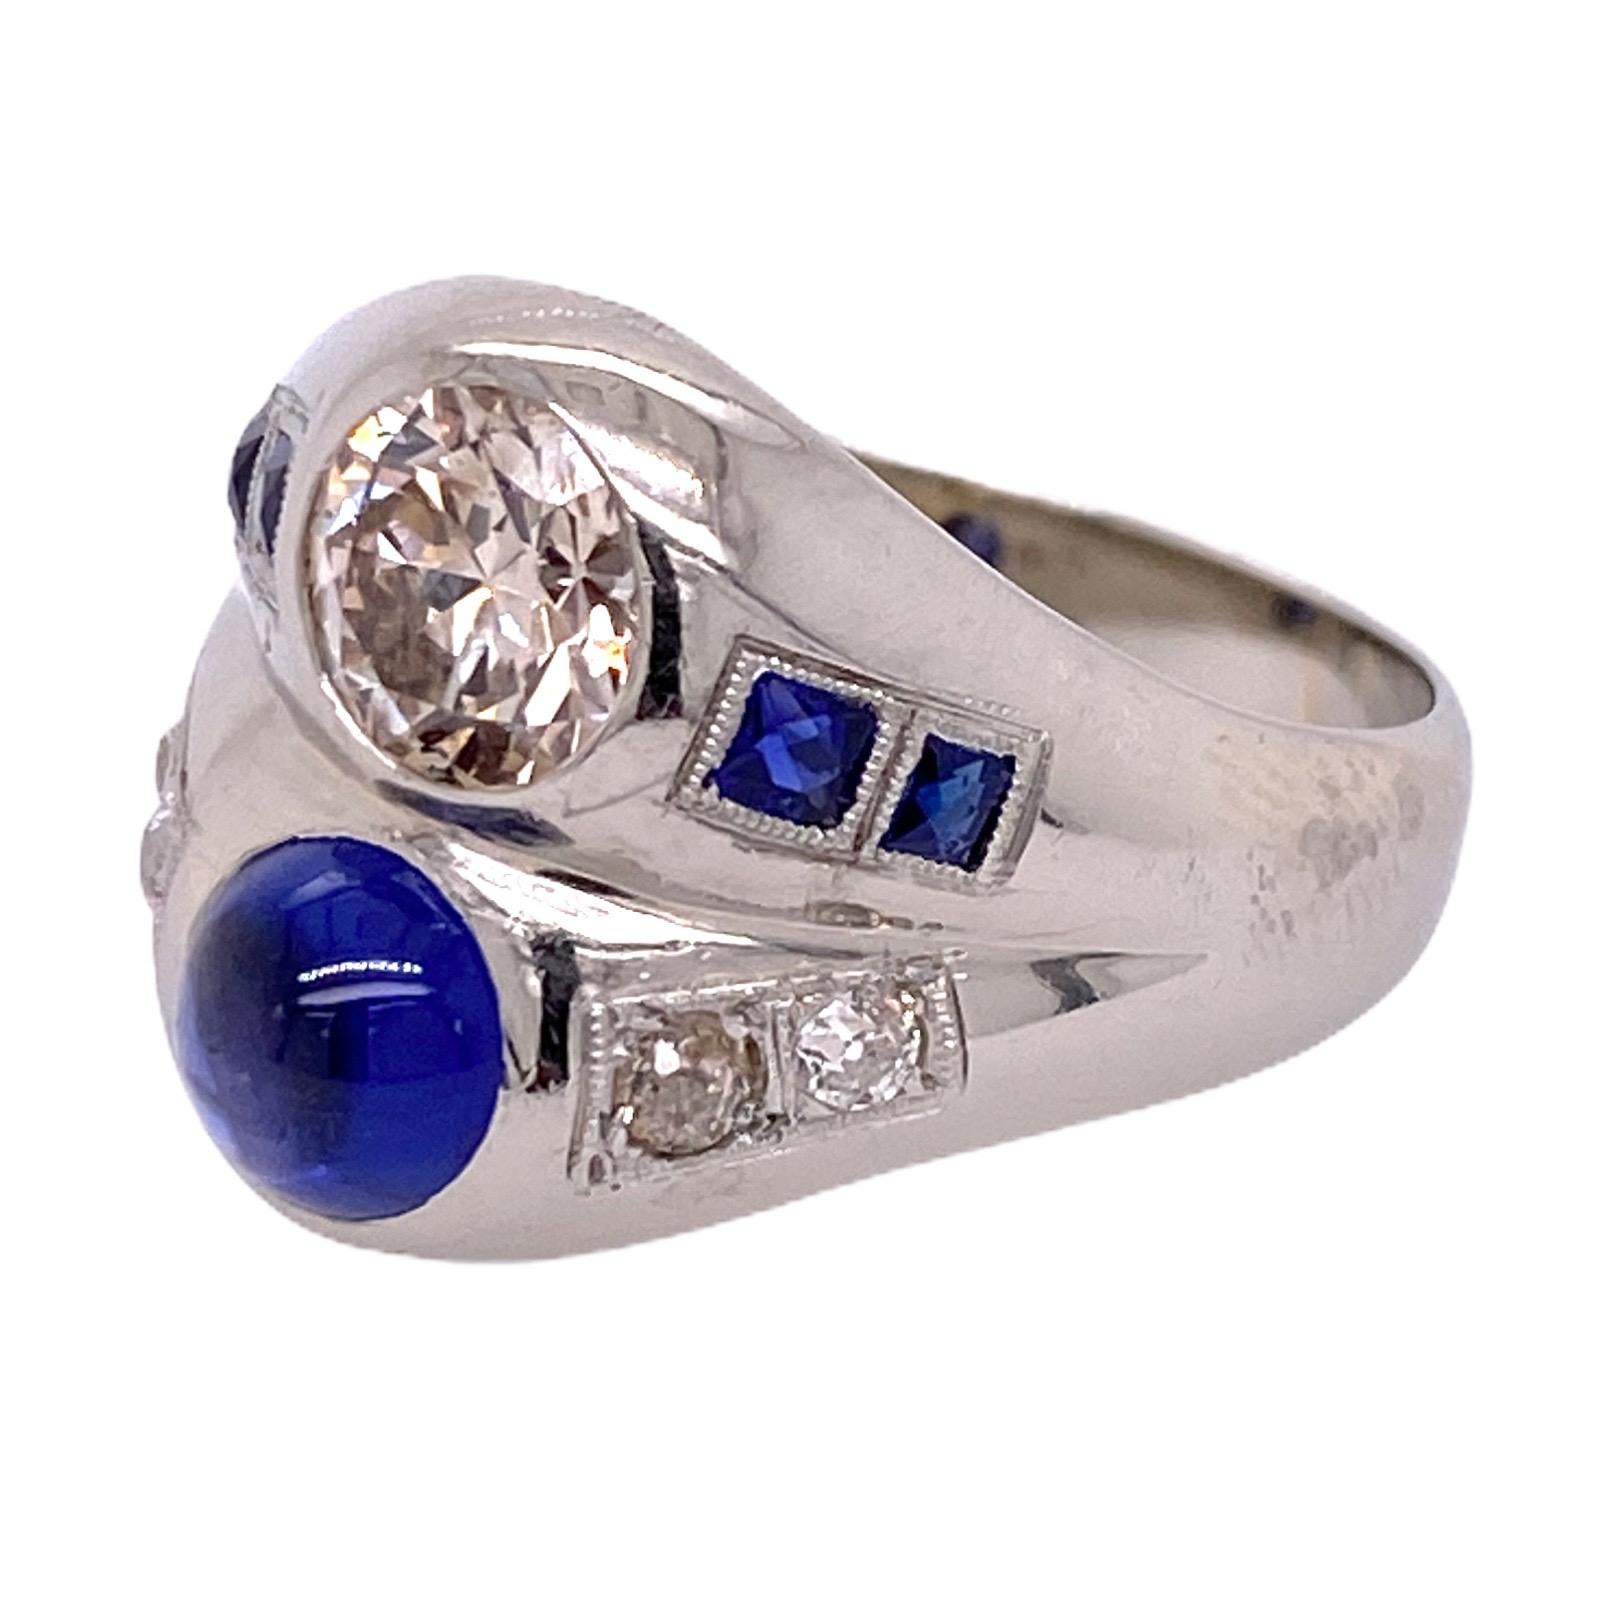 Beautiful diamond and blue sapphire estate ring fashioned in 18 karat white gold. The two stone ring features an approximately 1.20 carat Old European Cut Diamond, cabochon natural blue sapphire, and side diamonds (.25 ctw). The diamonds are graded